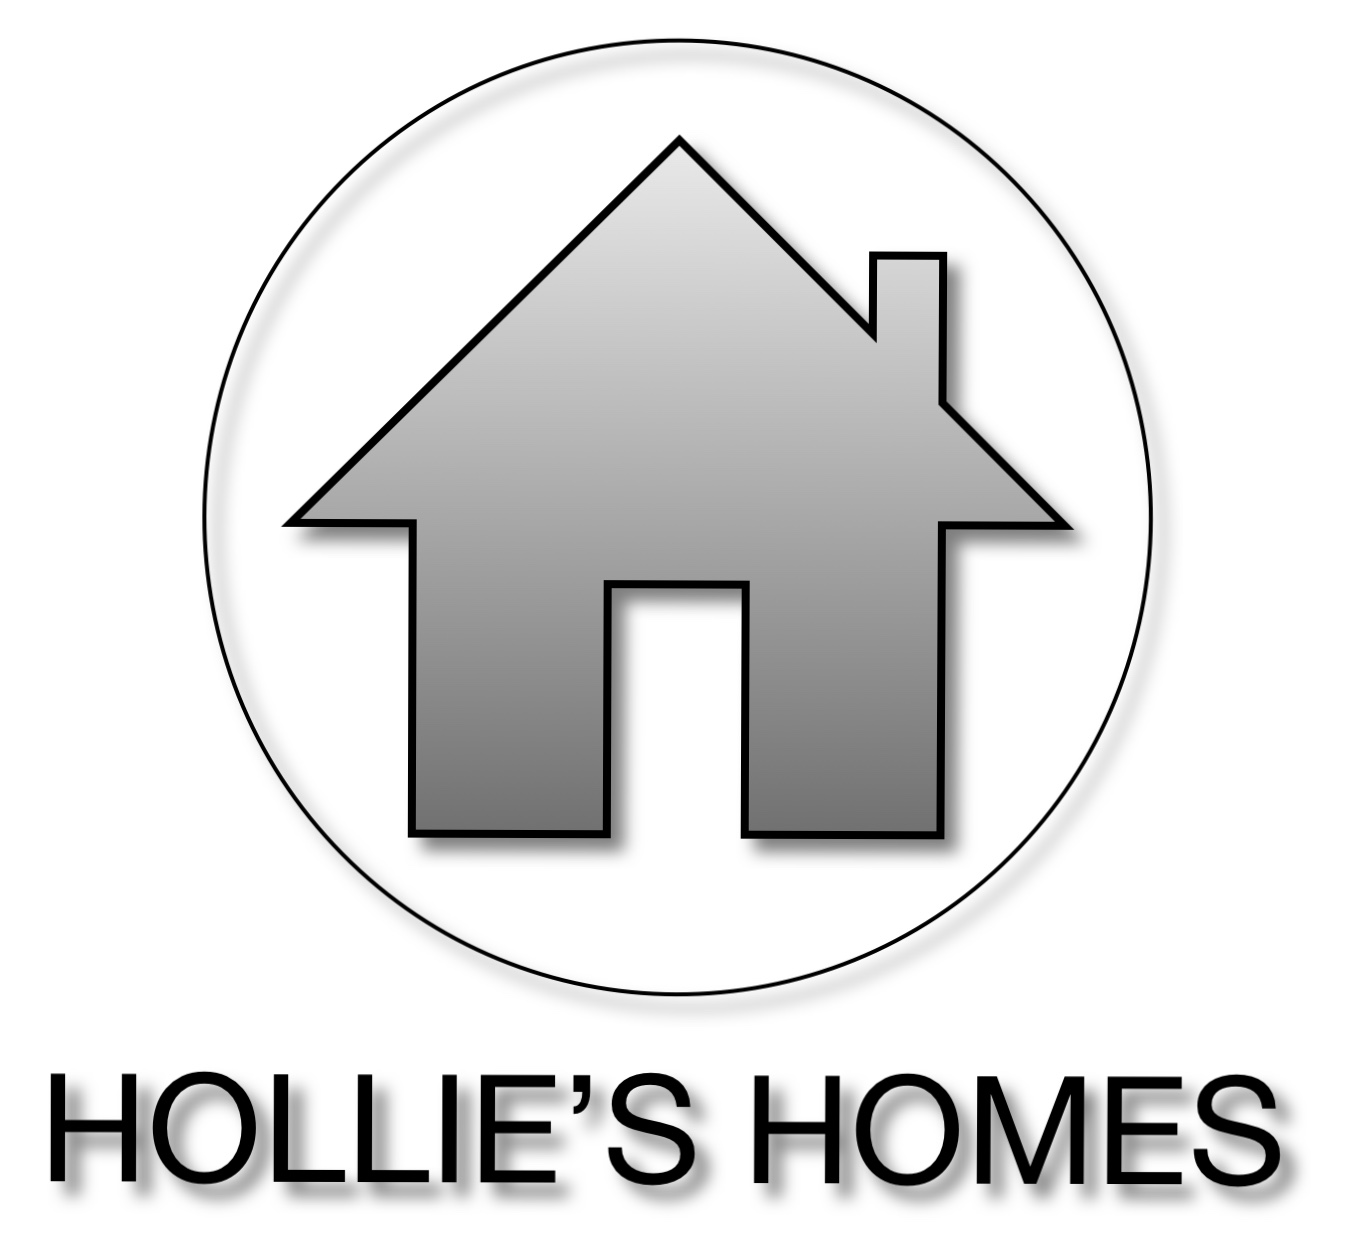 Logo of Hollies Homes Electrical Division Electricians And Electrical Contractors In Bradford, West Yorkshire